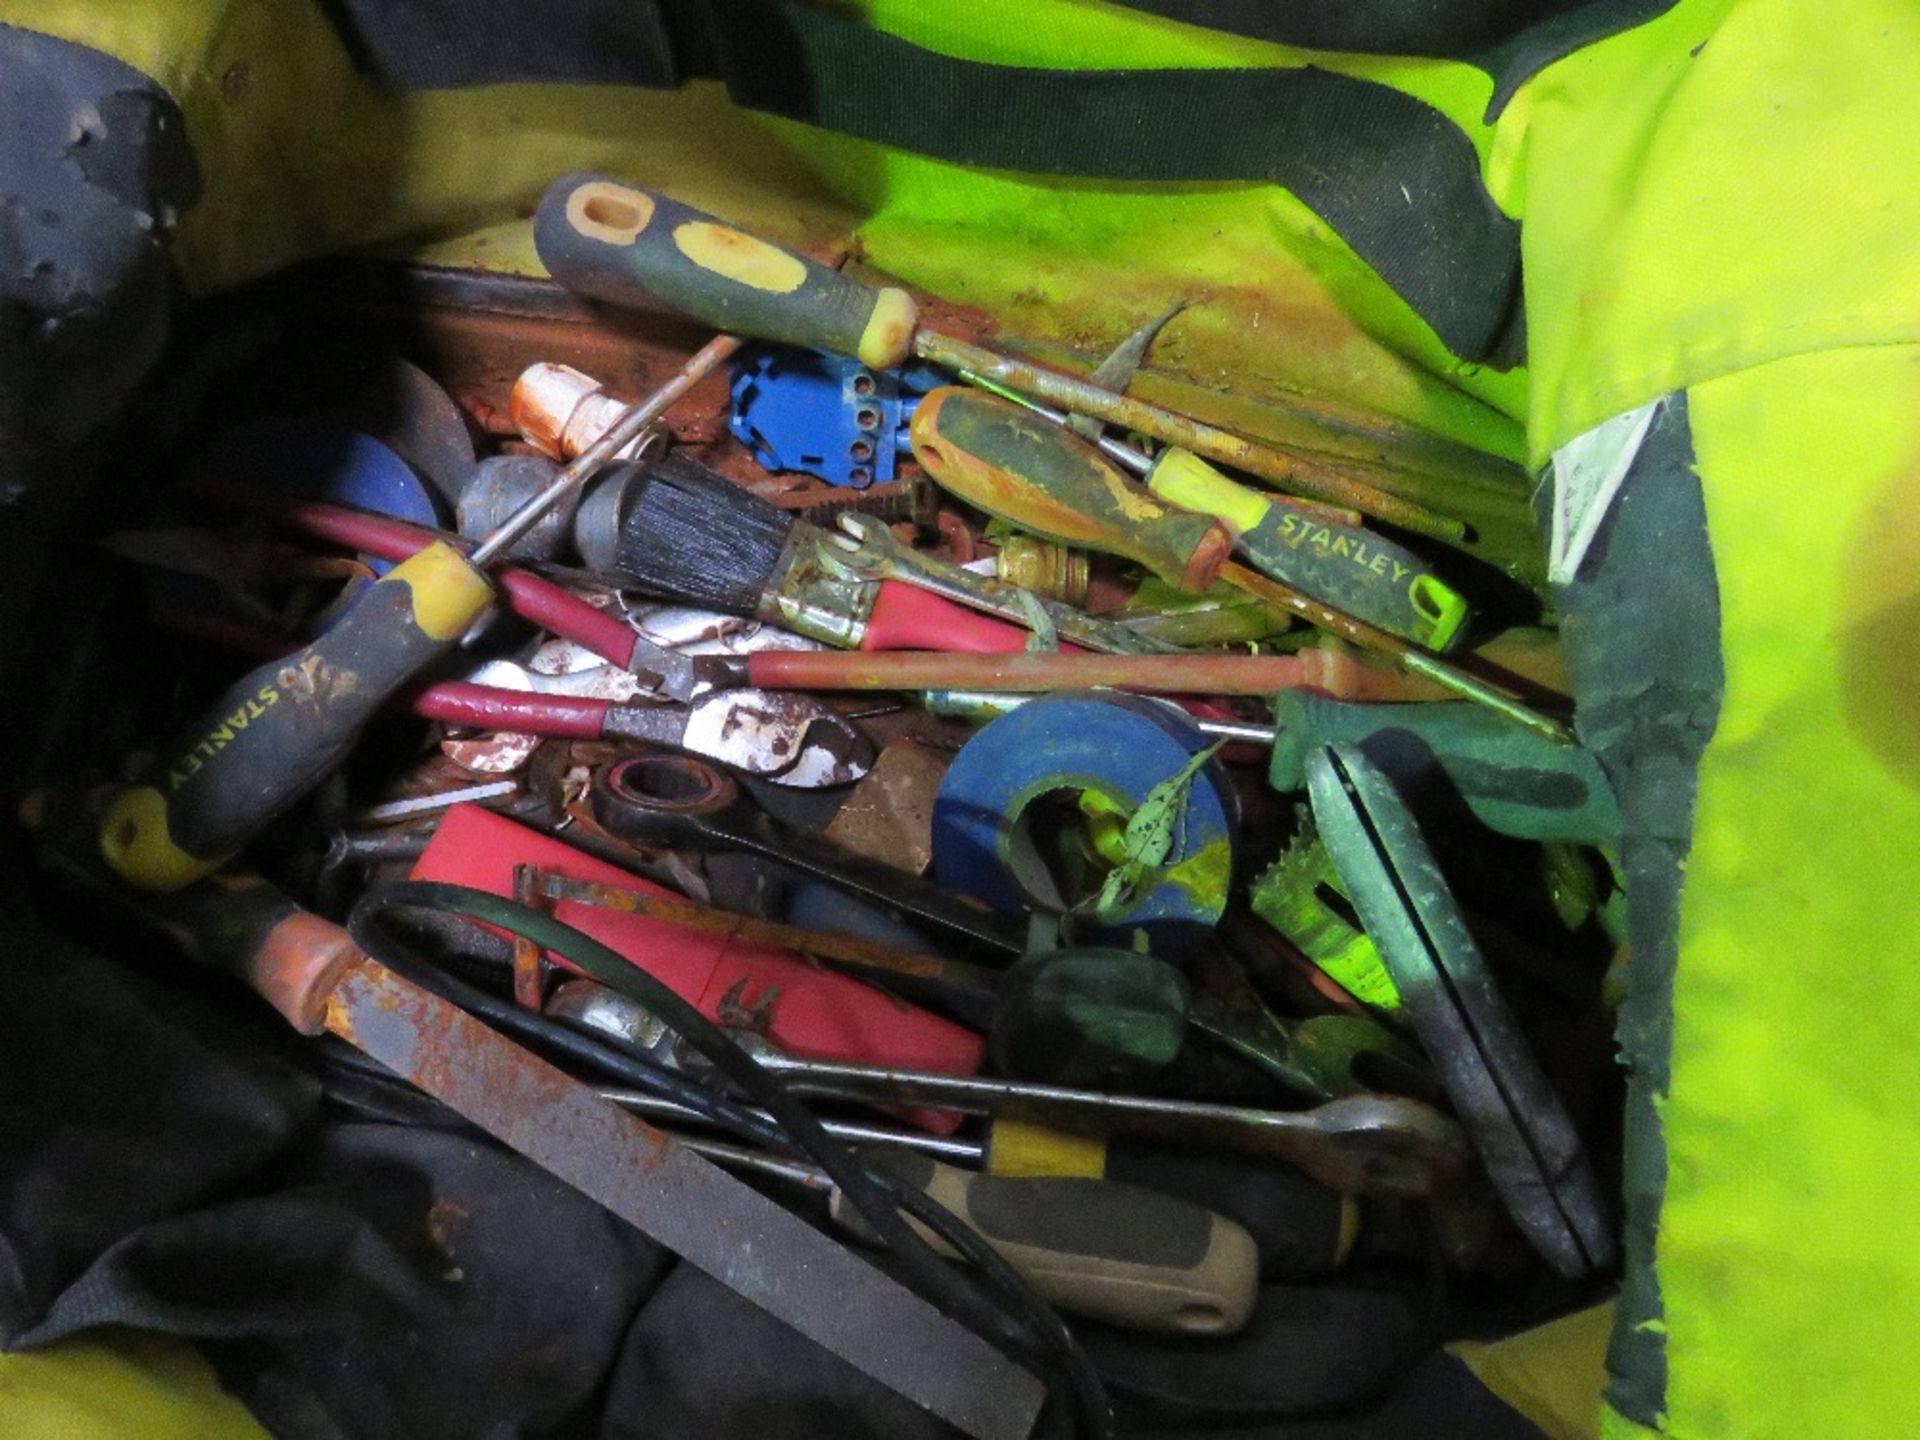 TOOL BAG CONTAINING DRILL BITS, DIE THREADING HOLDERS, ELECTRICIANS CABLE RODS ETC. SOURCED FROM COM - Image 6 of 6